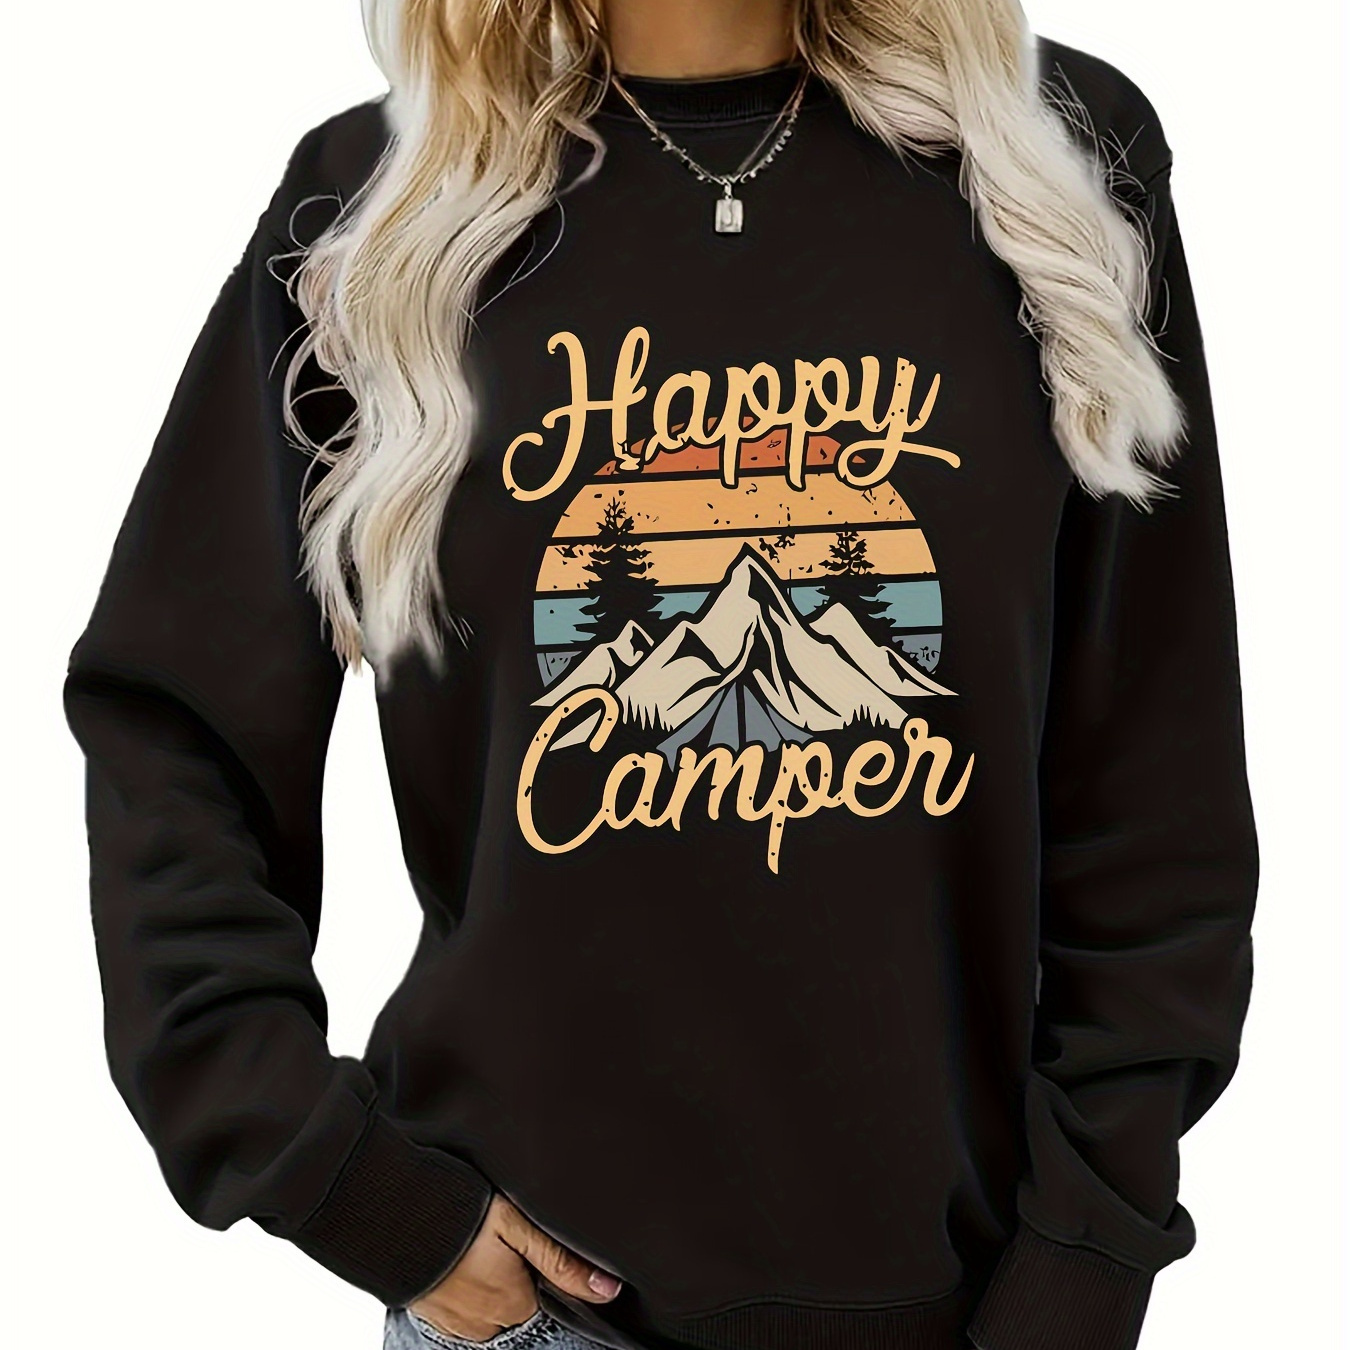 

Mountain & Letter Print Pullover Sweatshirt, Casual Long Sleeve Crew Neck Sweatshirt For Spring & Fall, Women's Clothing